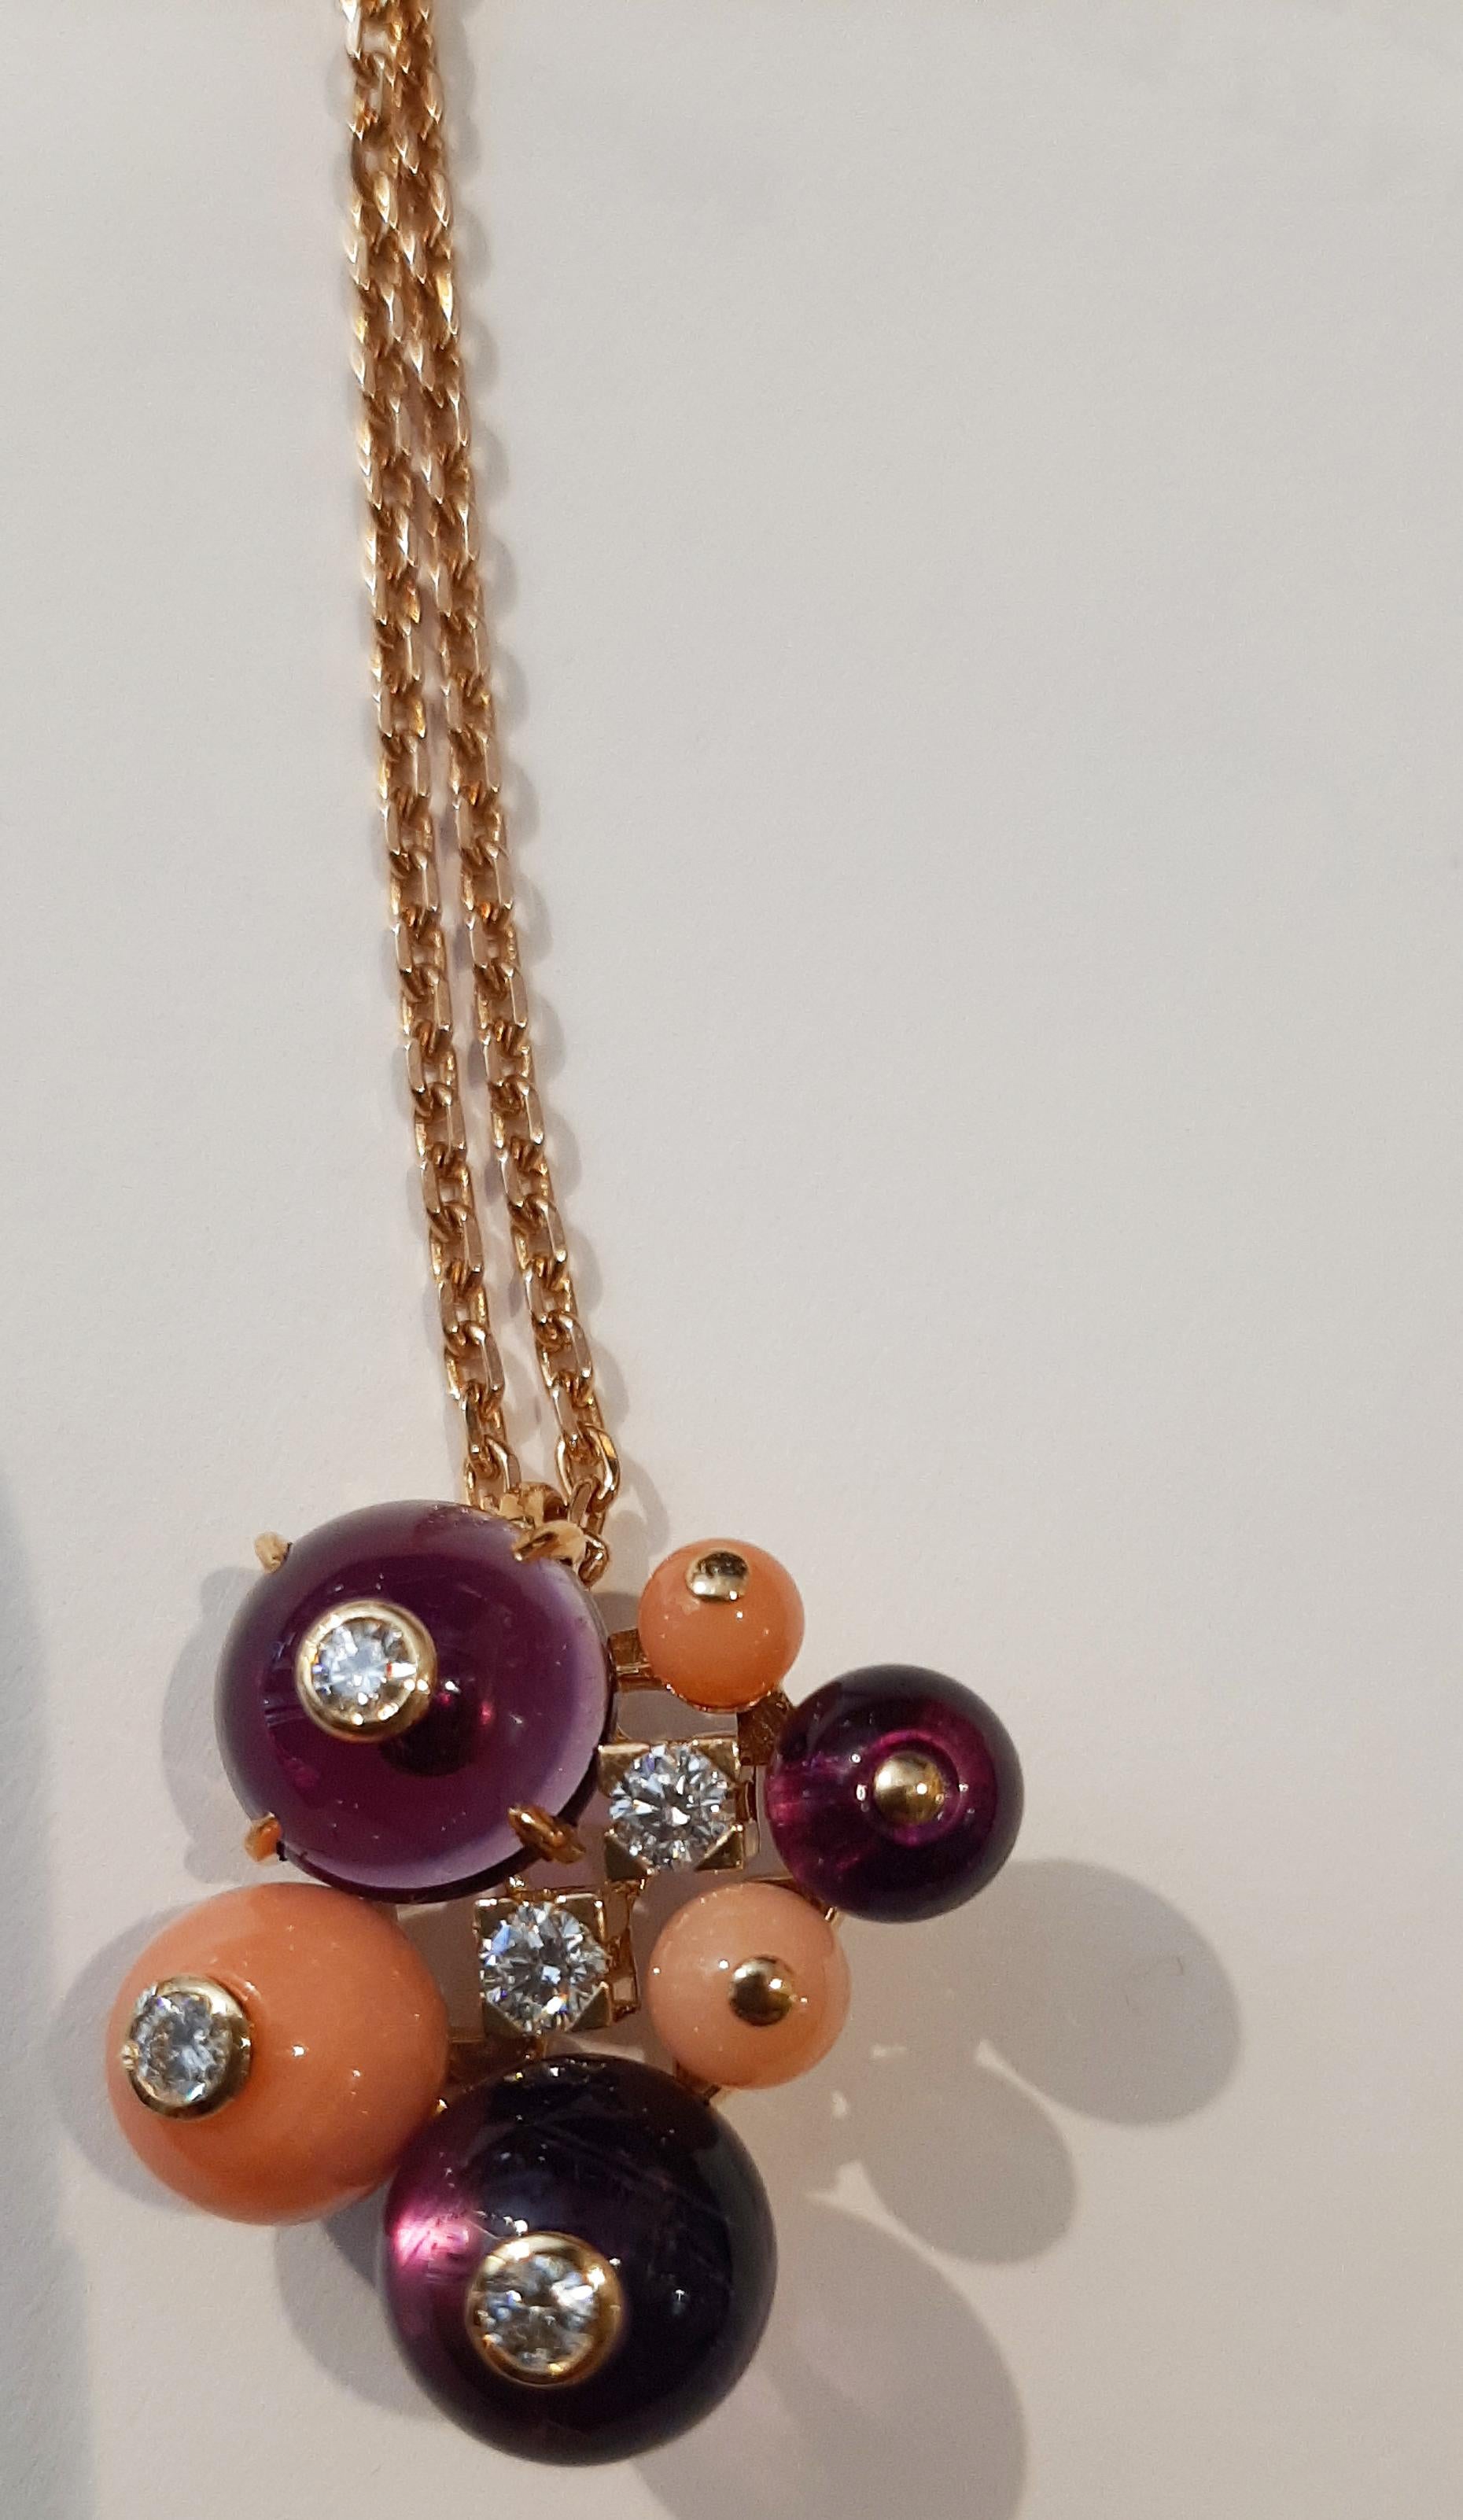 This delightfully darling 18k Rose Gold necklace comes from the 